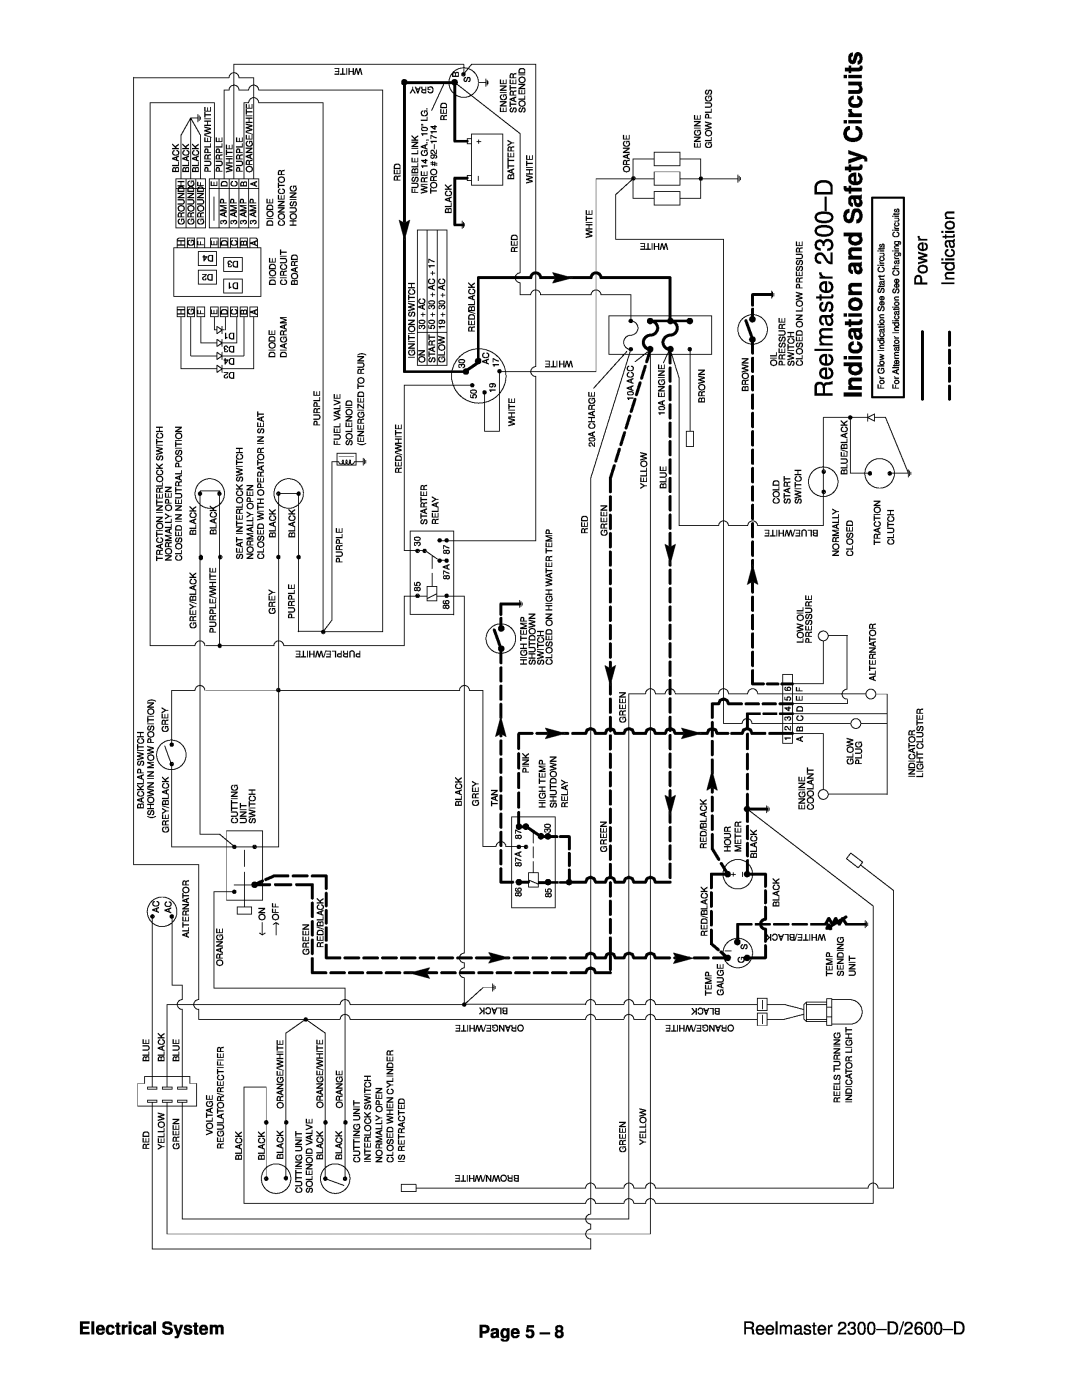 Toro 2300-D, 2600D service manual Reelmaster 2300±D, Indication and Safety Circuits, Electrical System, Page 5 ± 